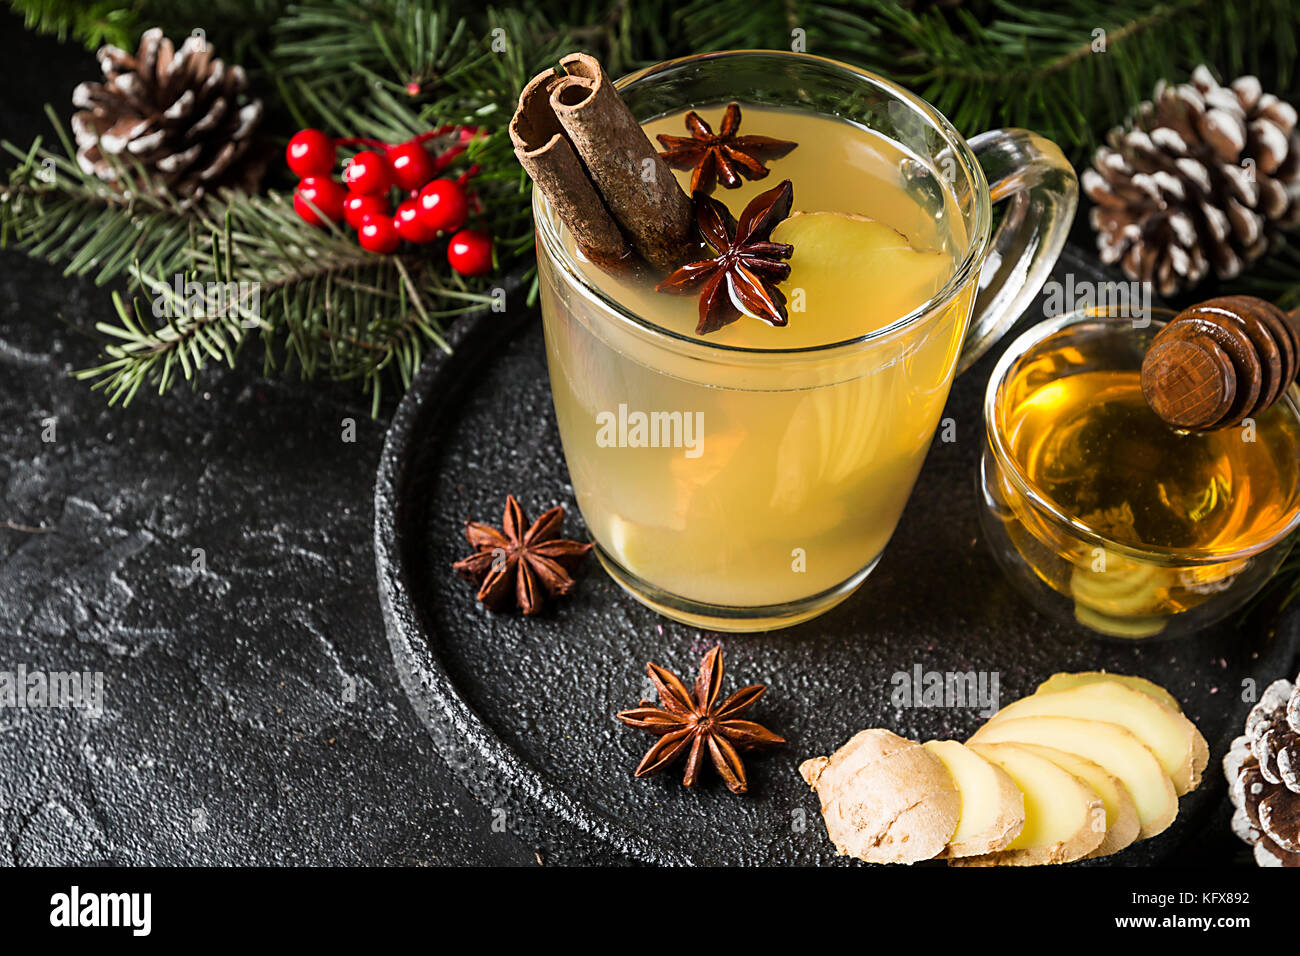 Winter Ginger drink Stock Photo - Alamy